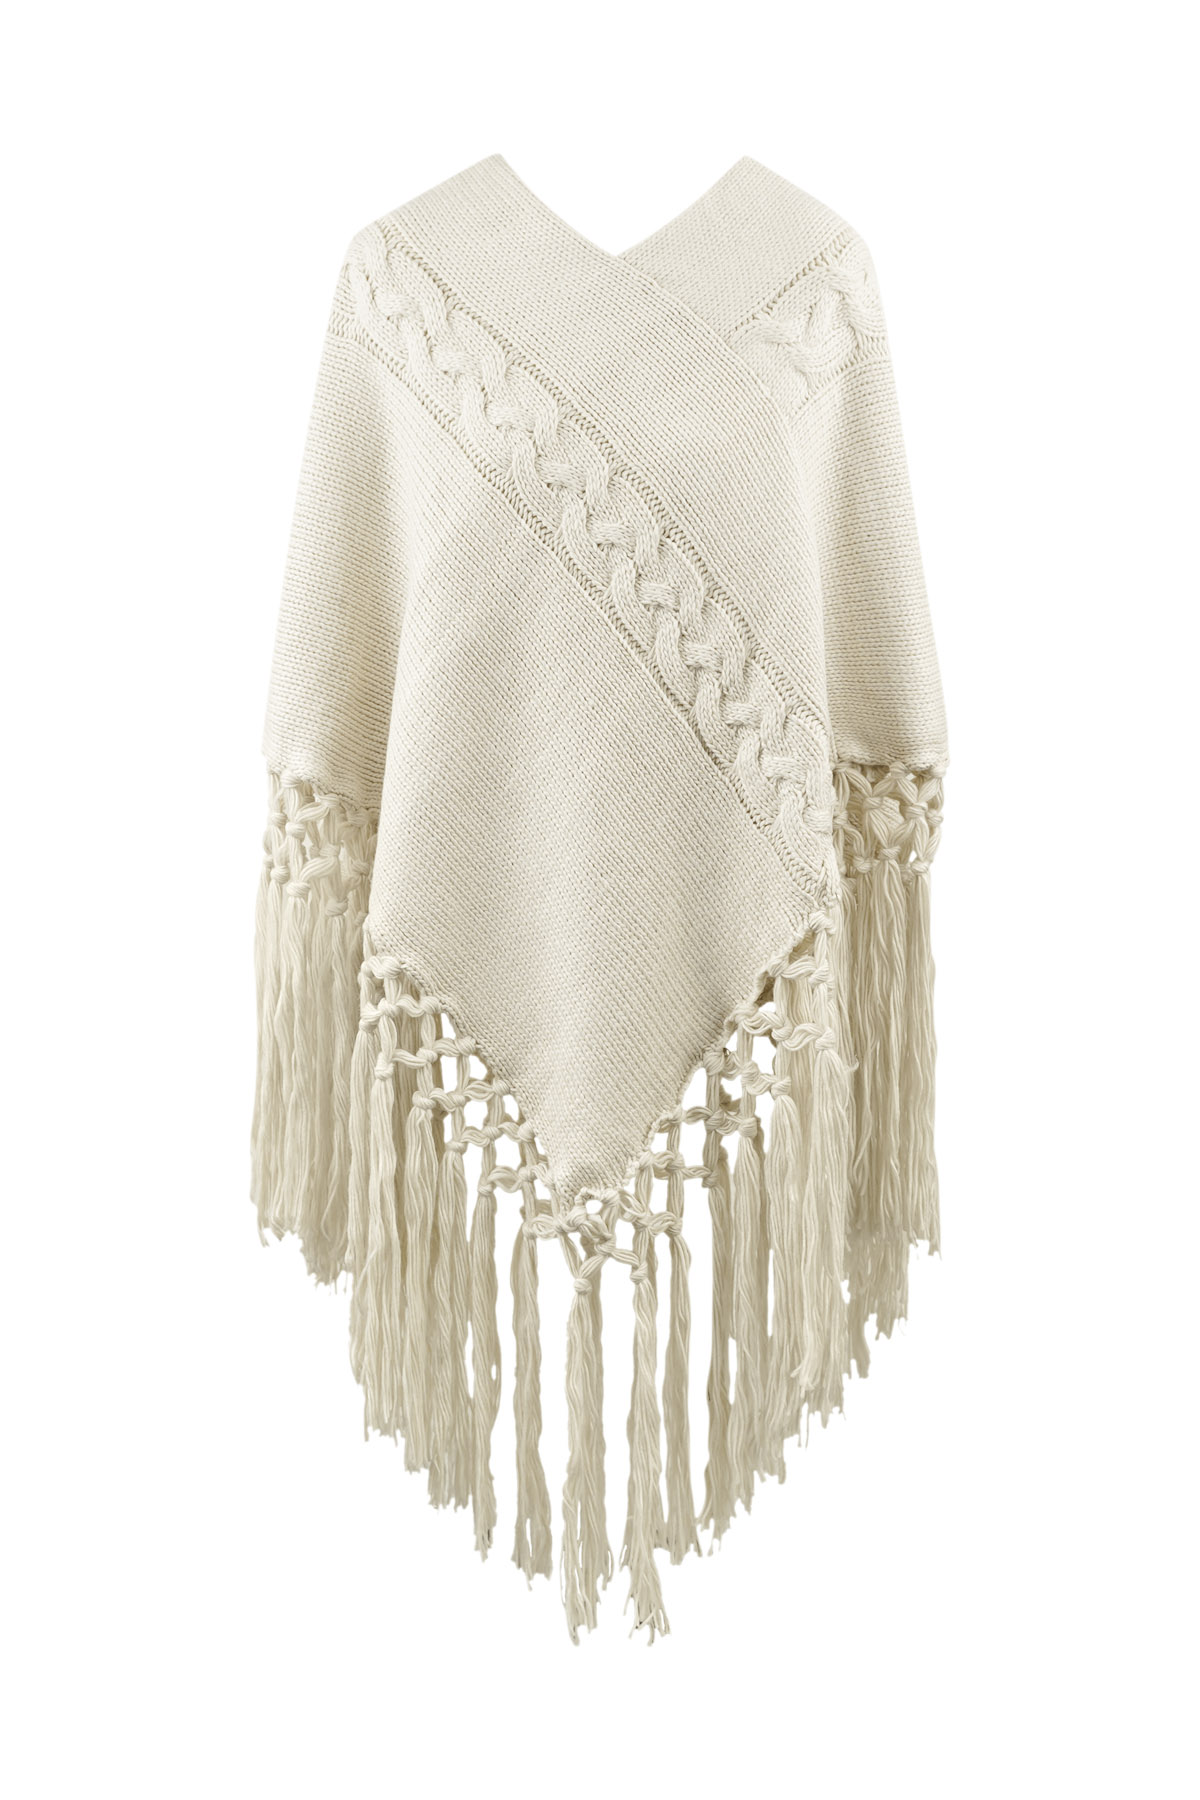 Poncho with strings - white